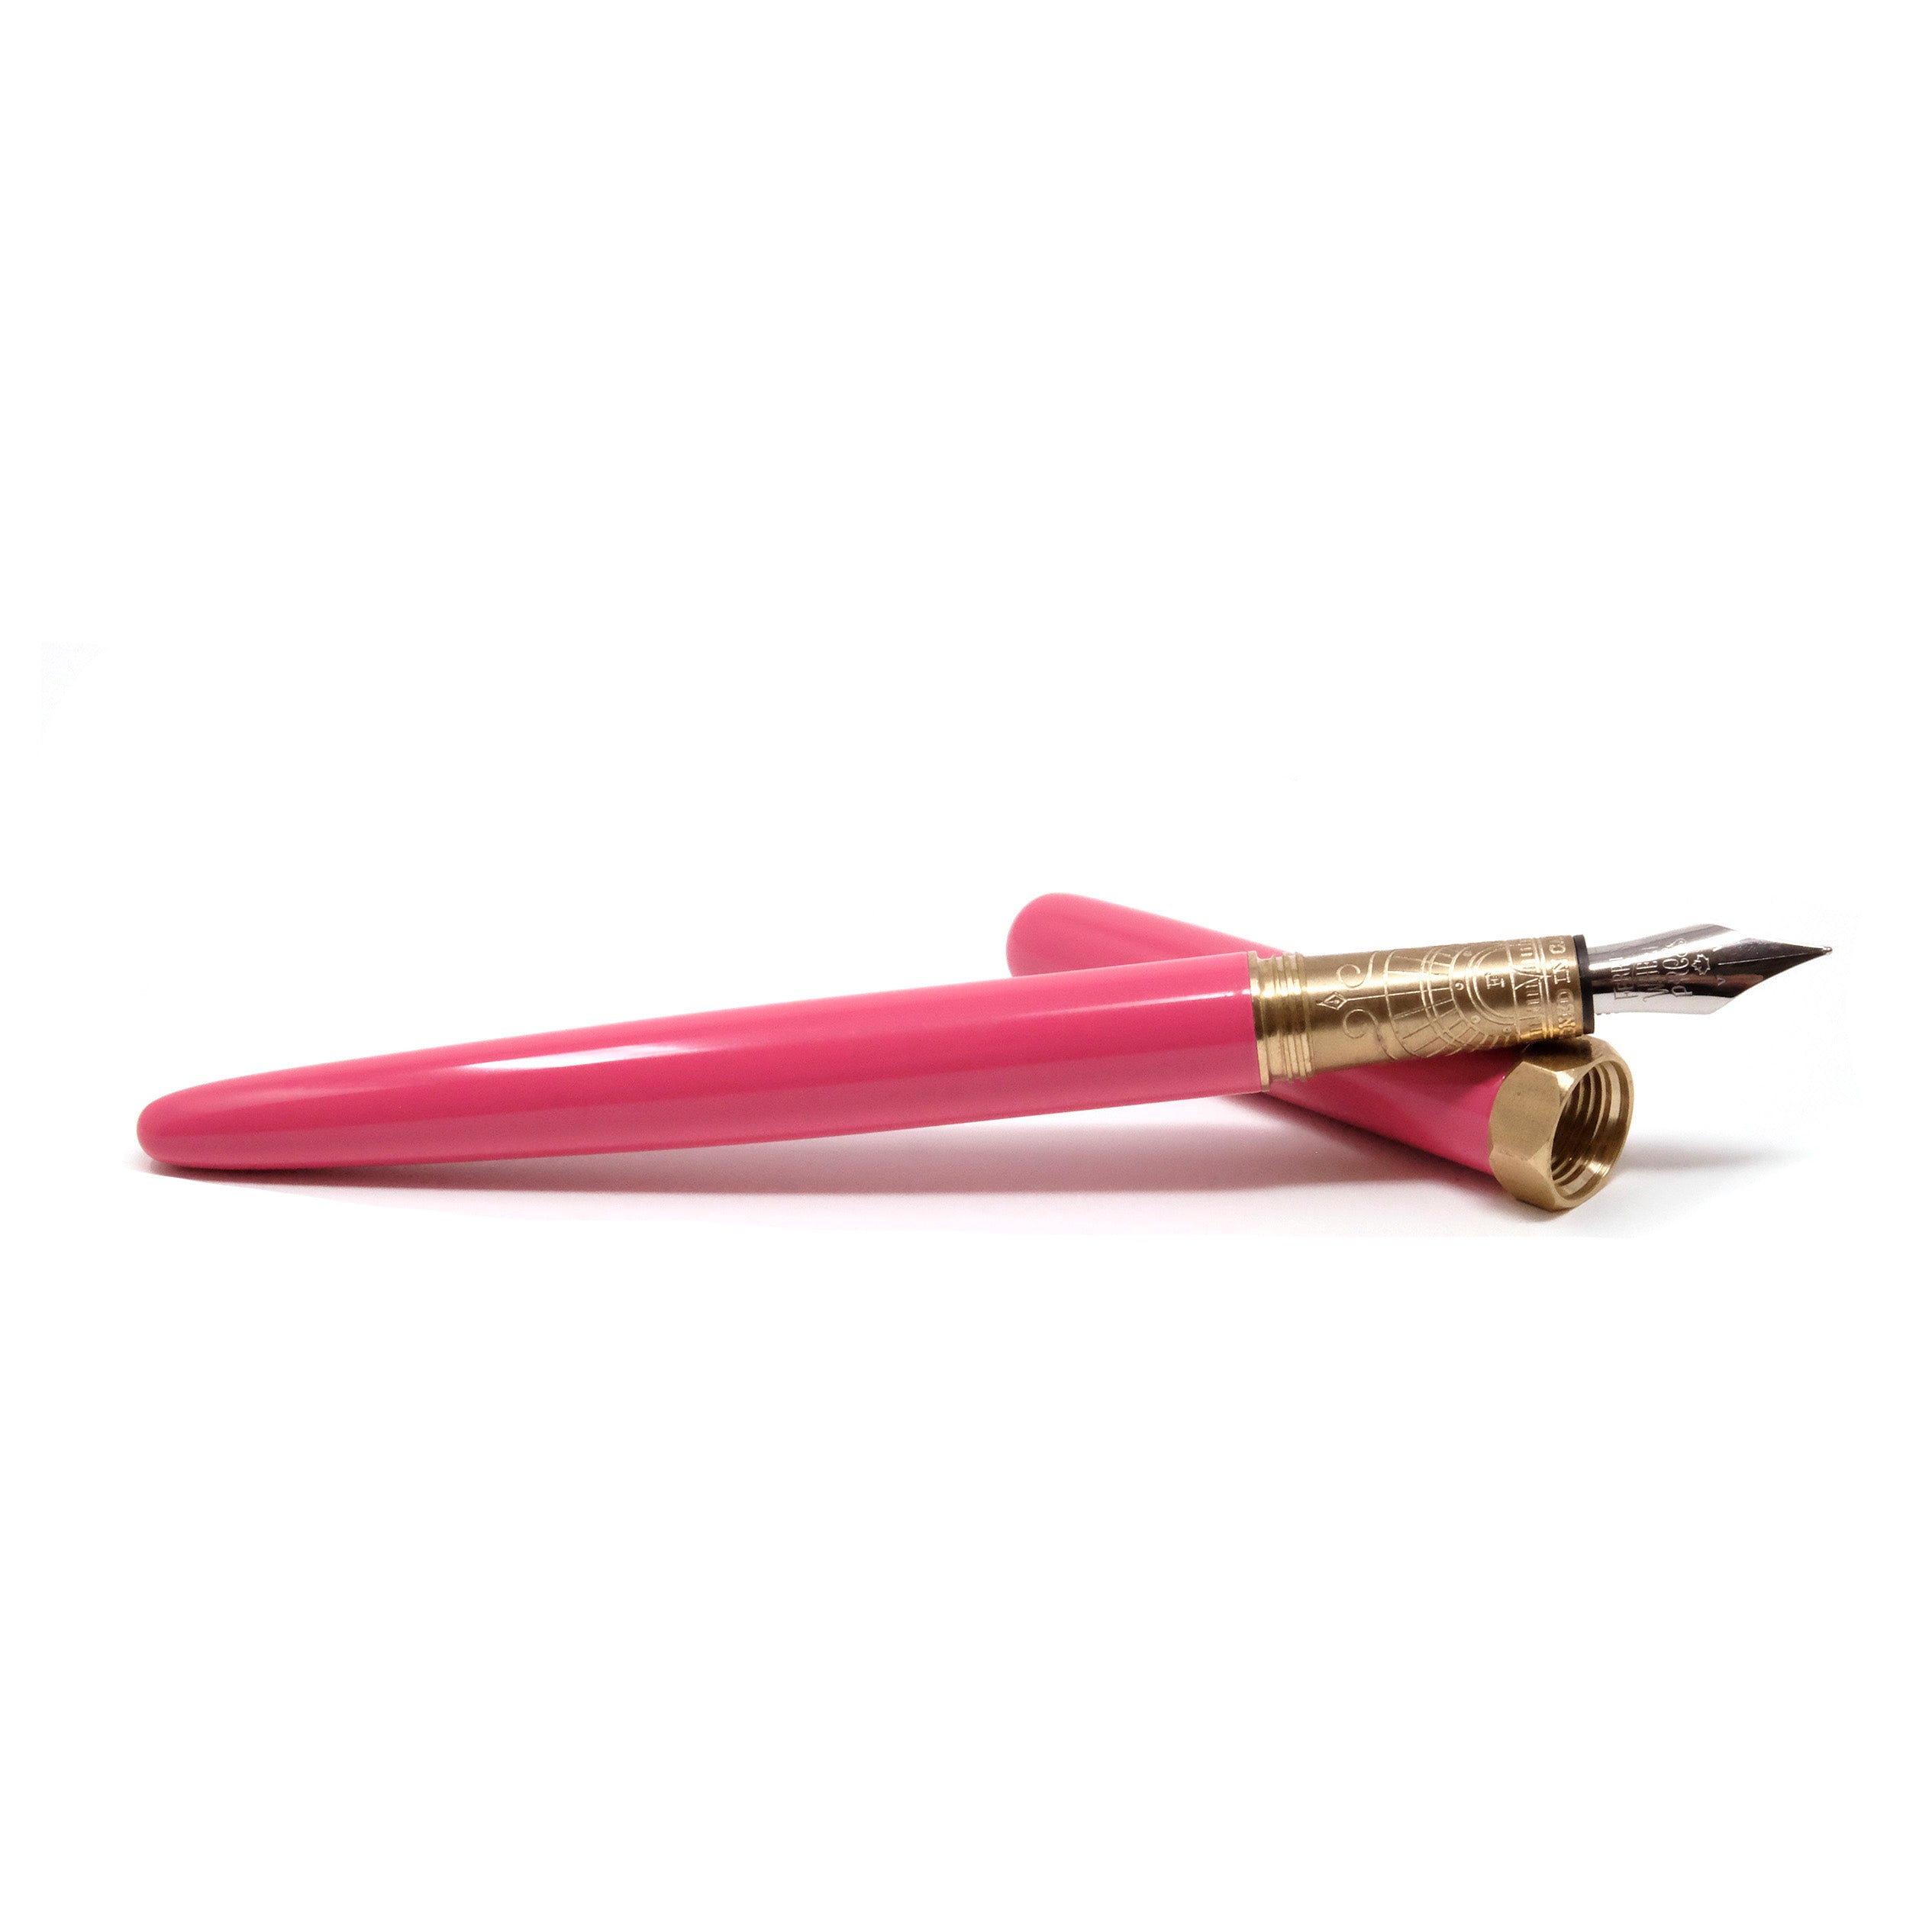 The Brush Fountain Pen - Piccadilly Pink